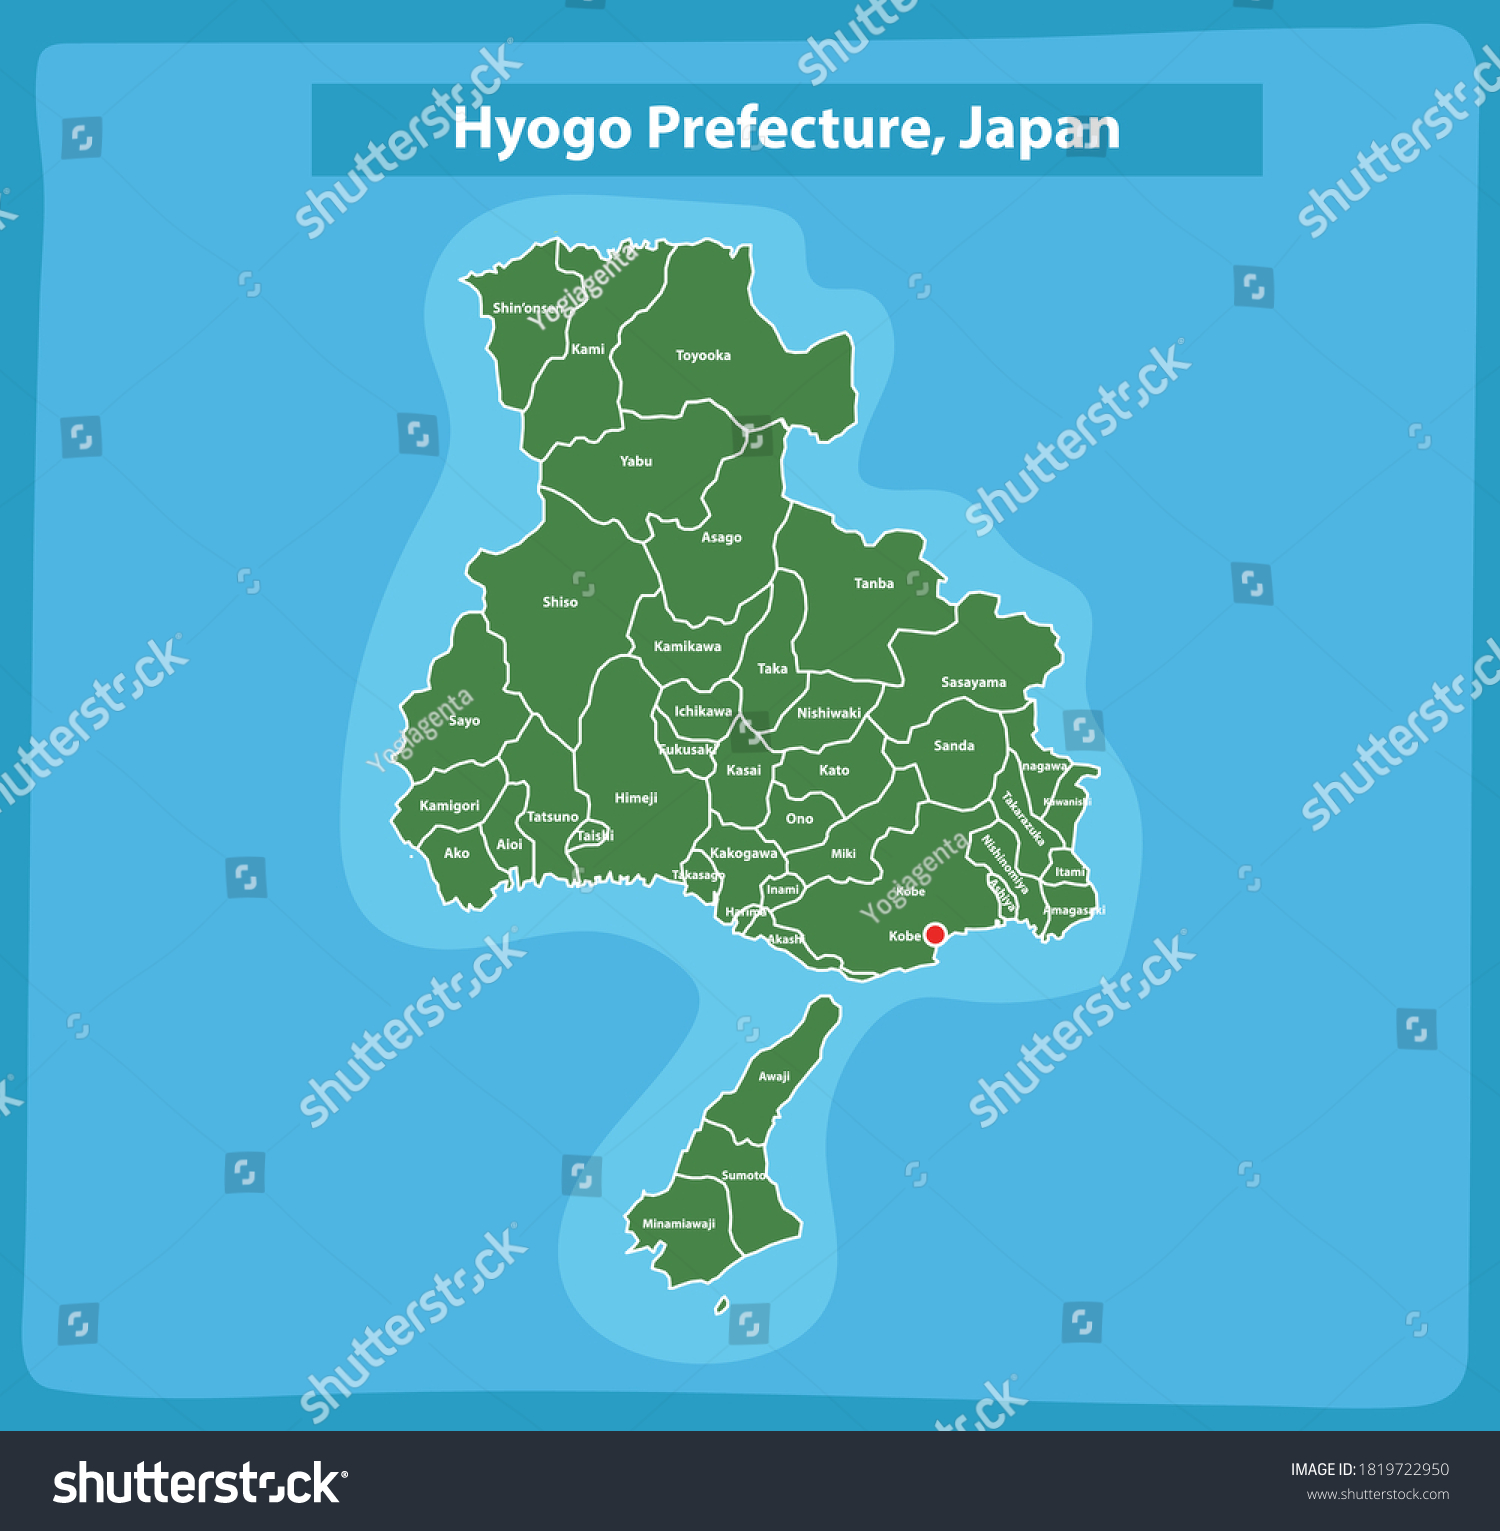 Hyogo Prefecture and Region Japan Map #1819722950